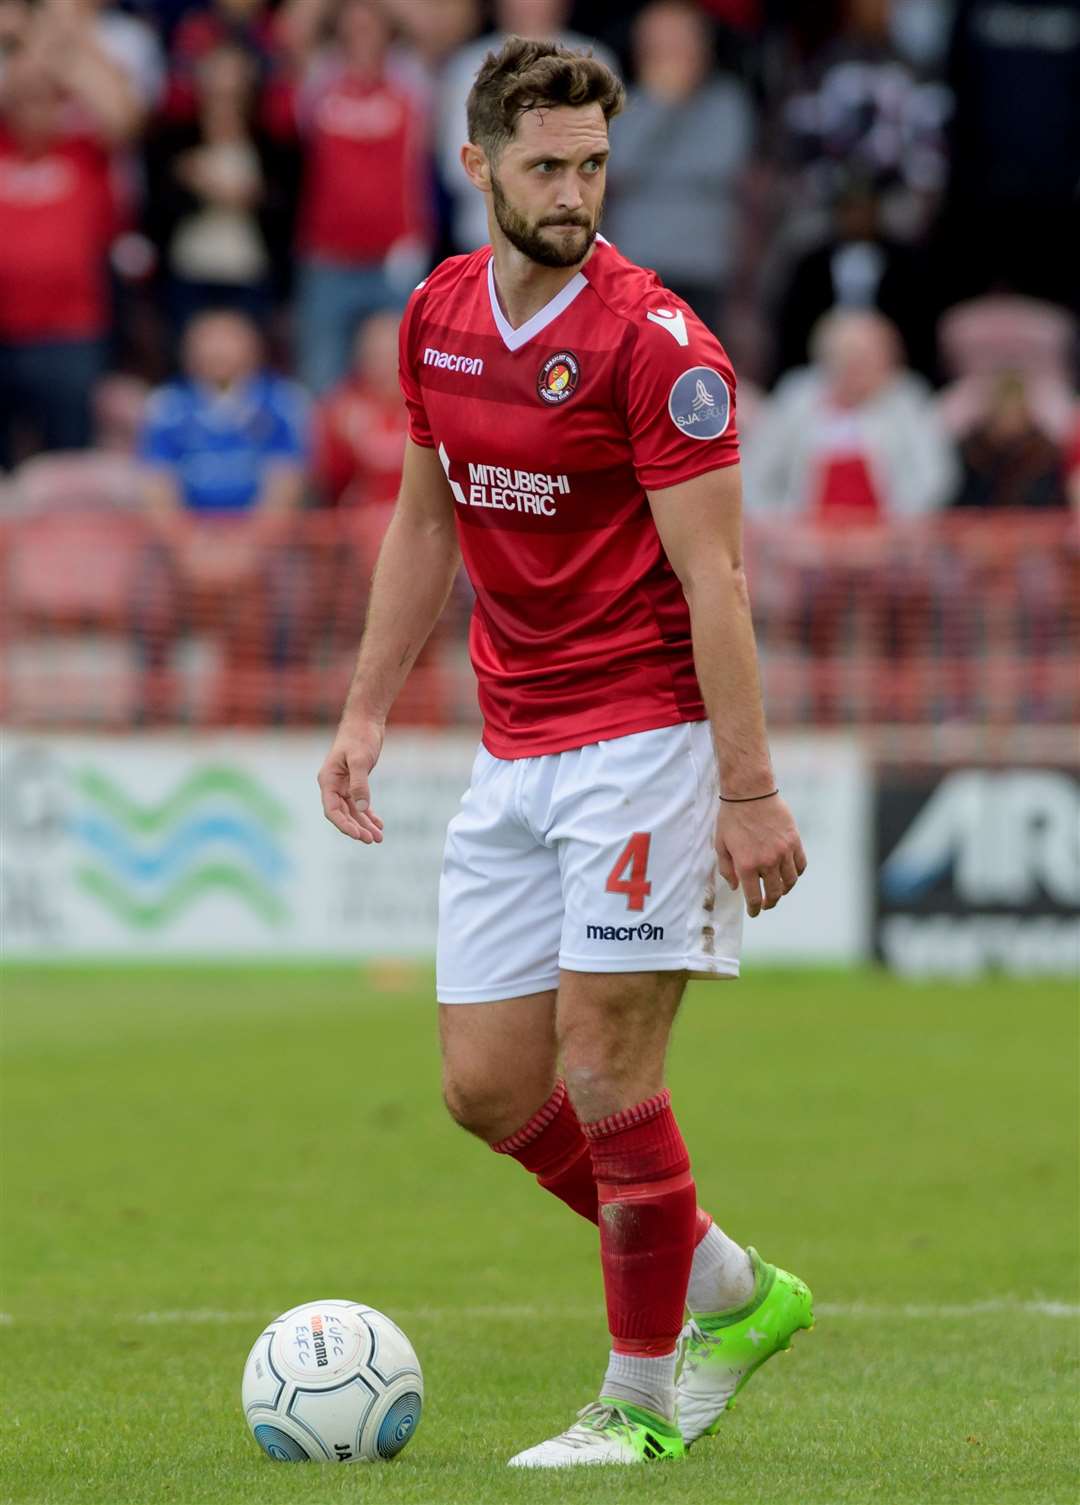 Midfielder Dean Rance – has joined Folkestone, reuniting with his former Ebbsfleet team-mate Andy Drury. Picture: Andy Payton